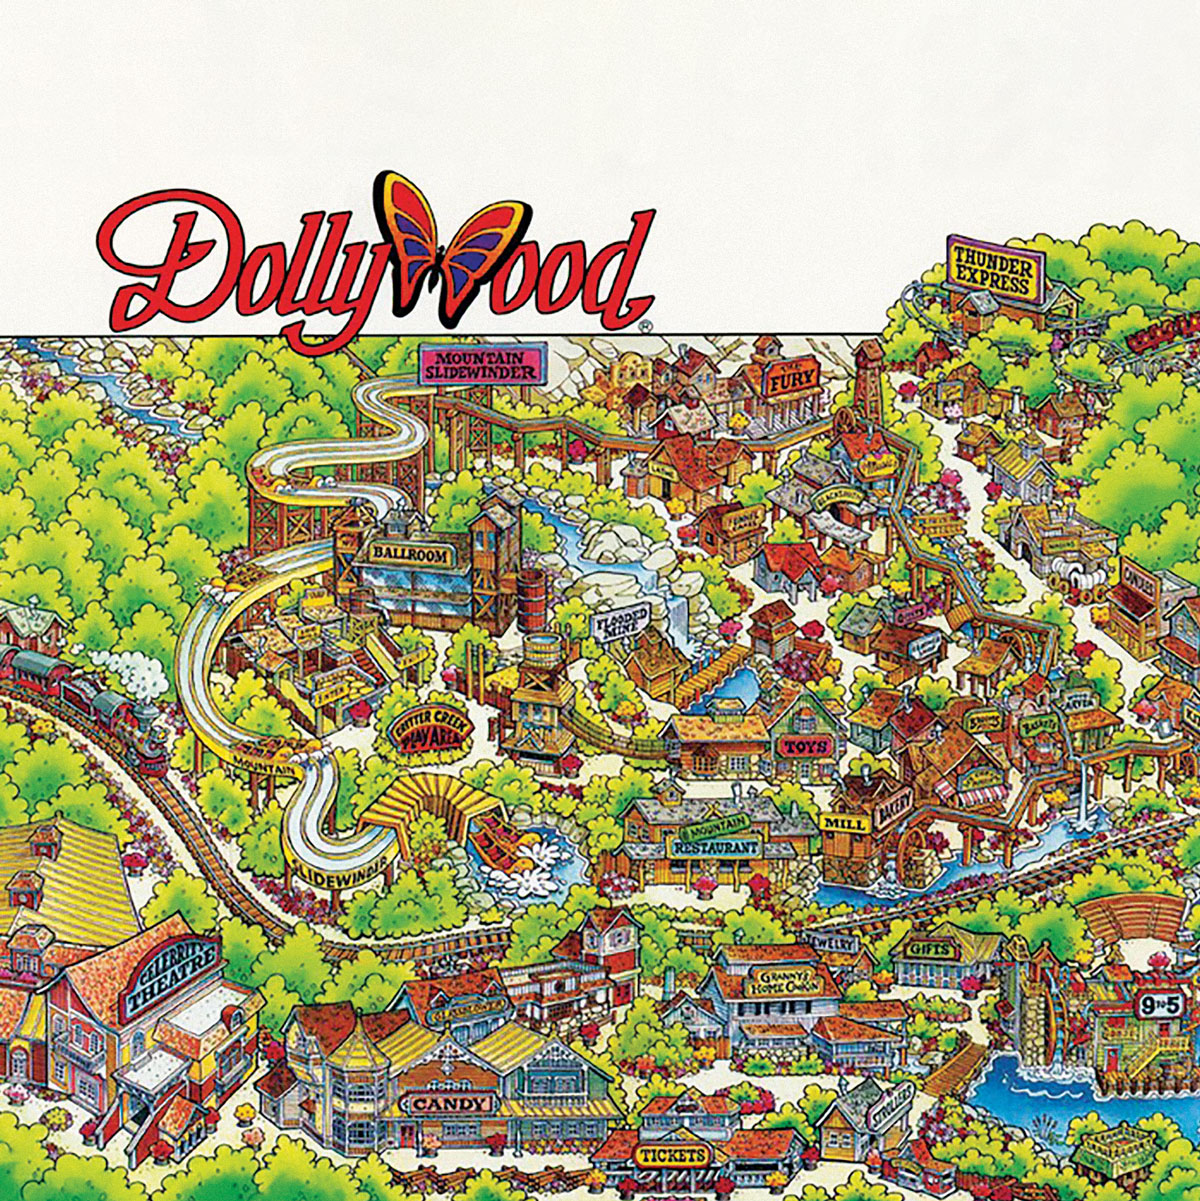 Dollywood map from 1989